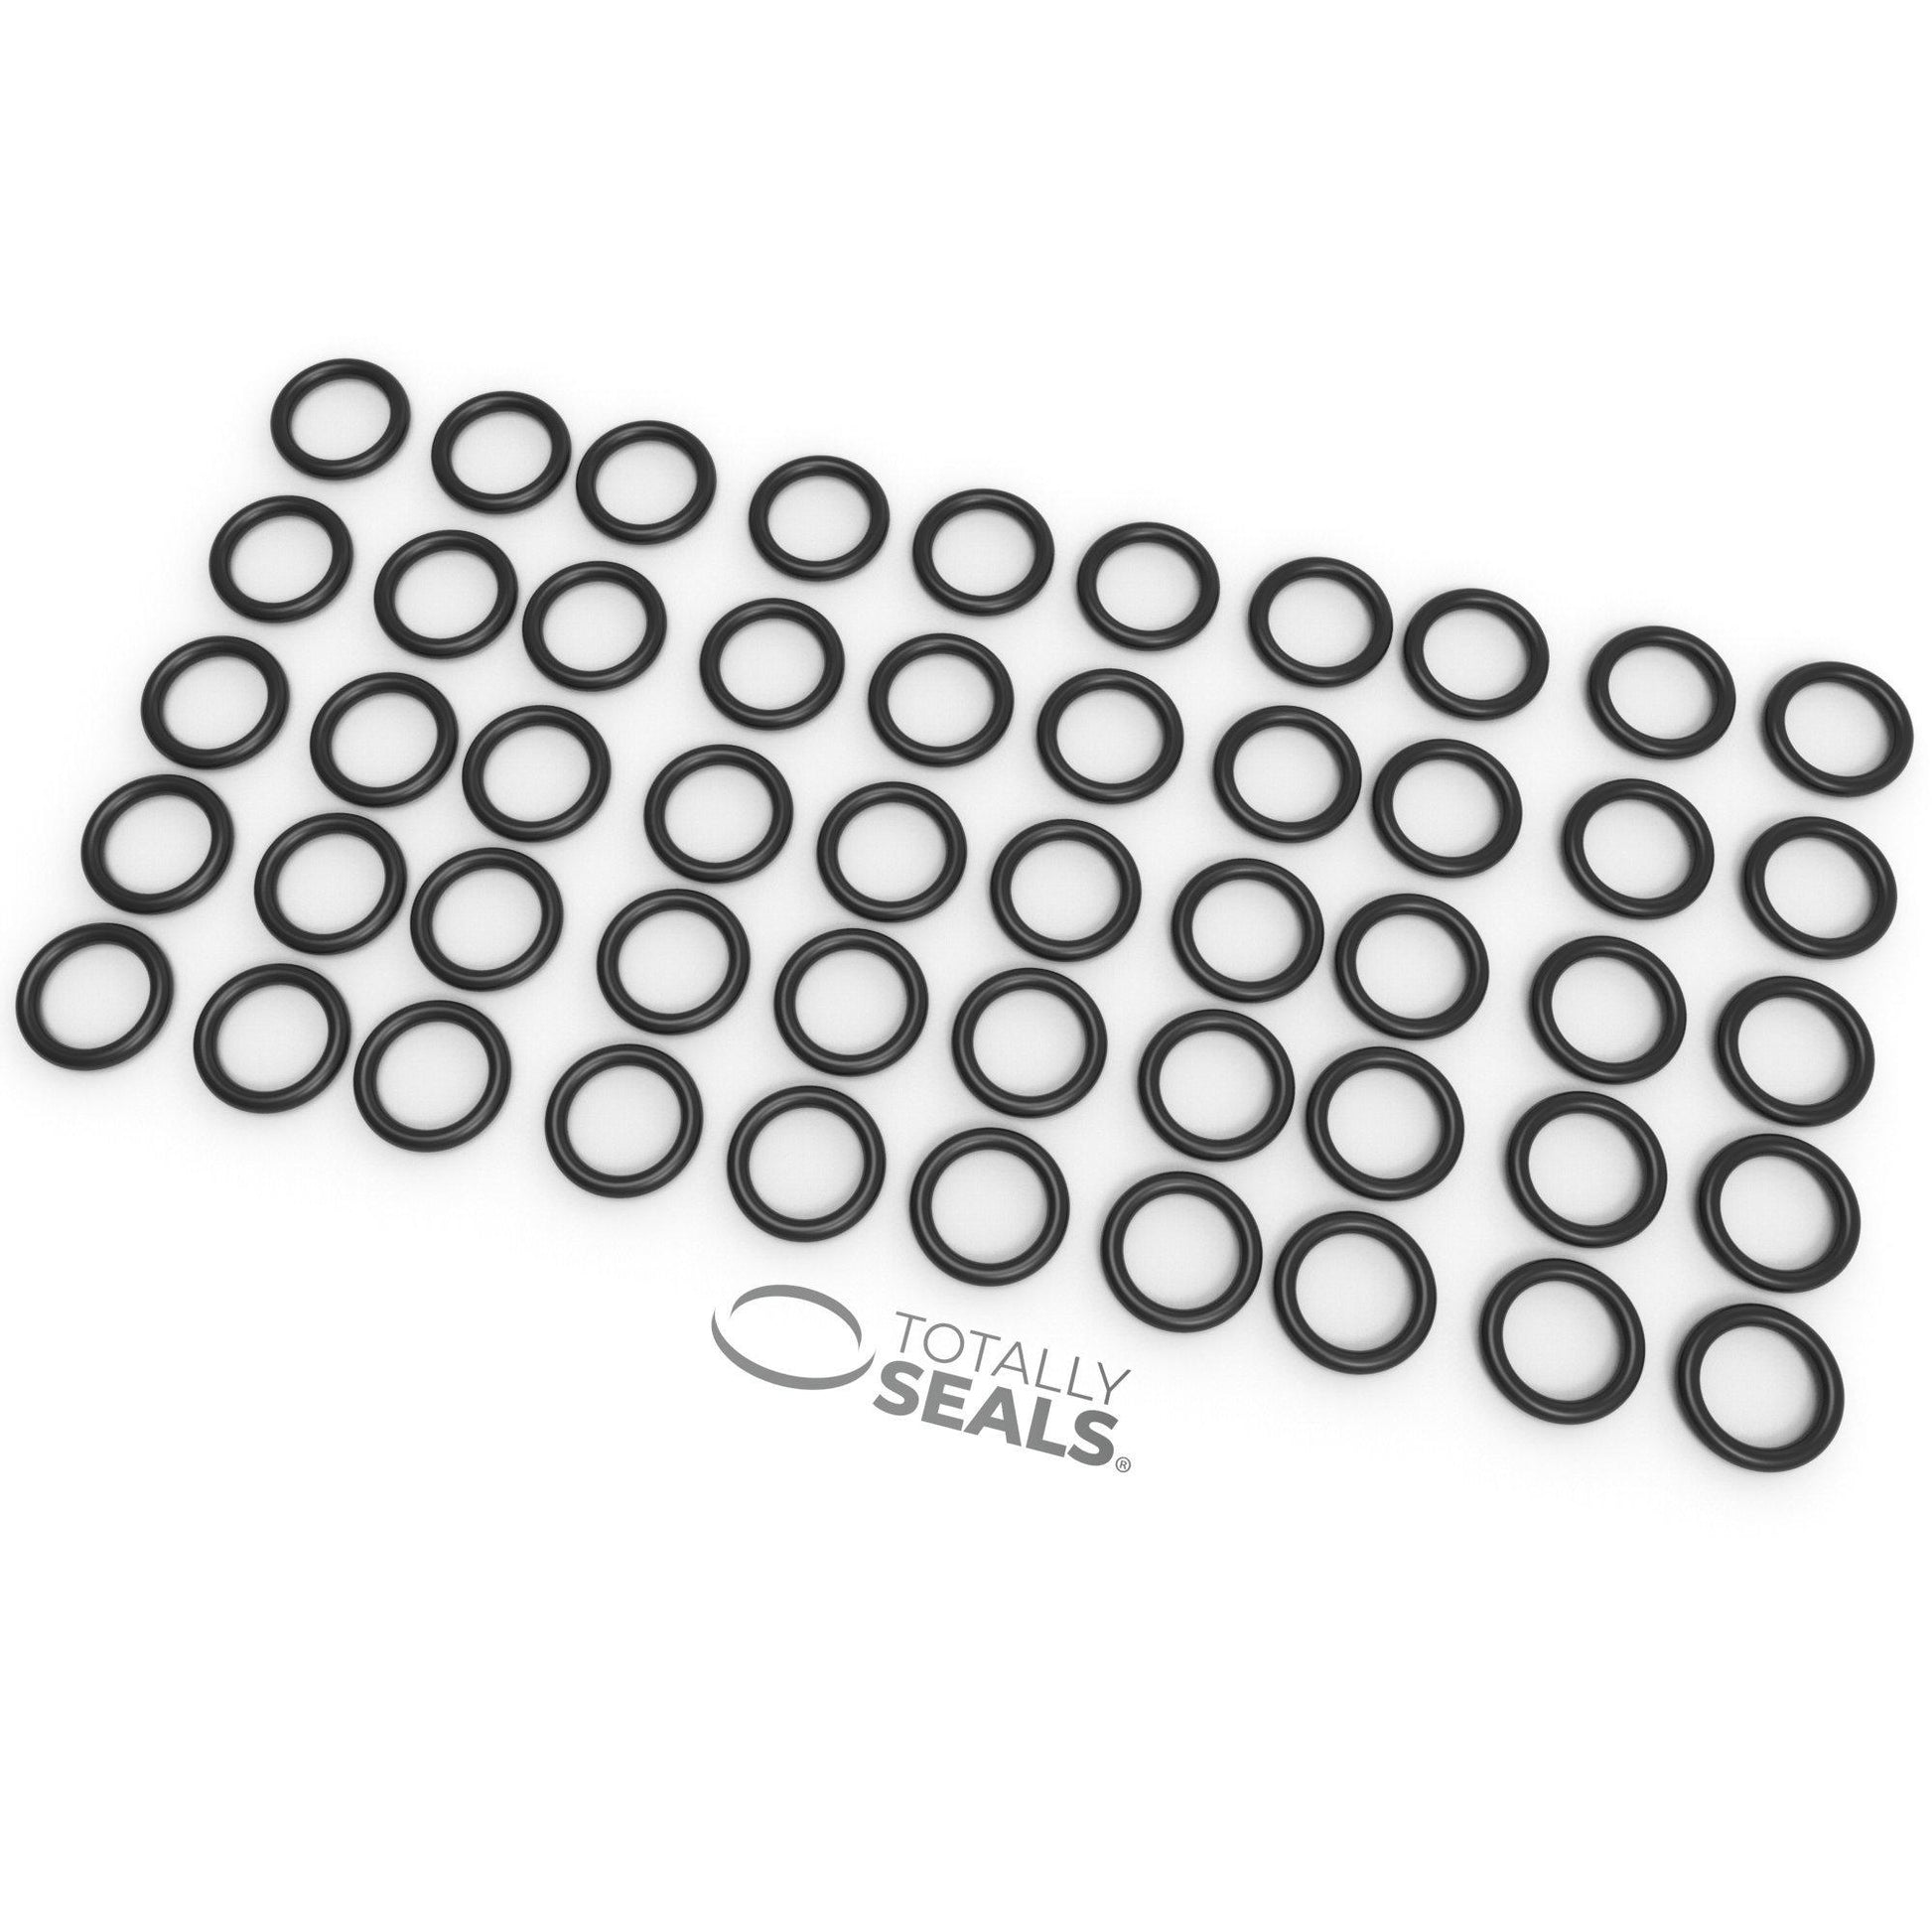 5mm x 1mm (7mm OD) Nitrile O-Rings – Totally Seals